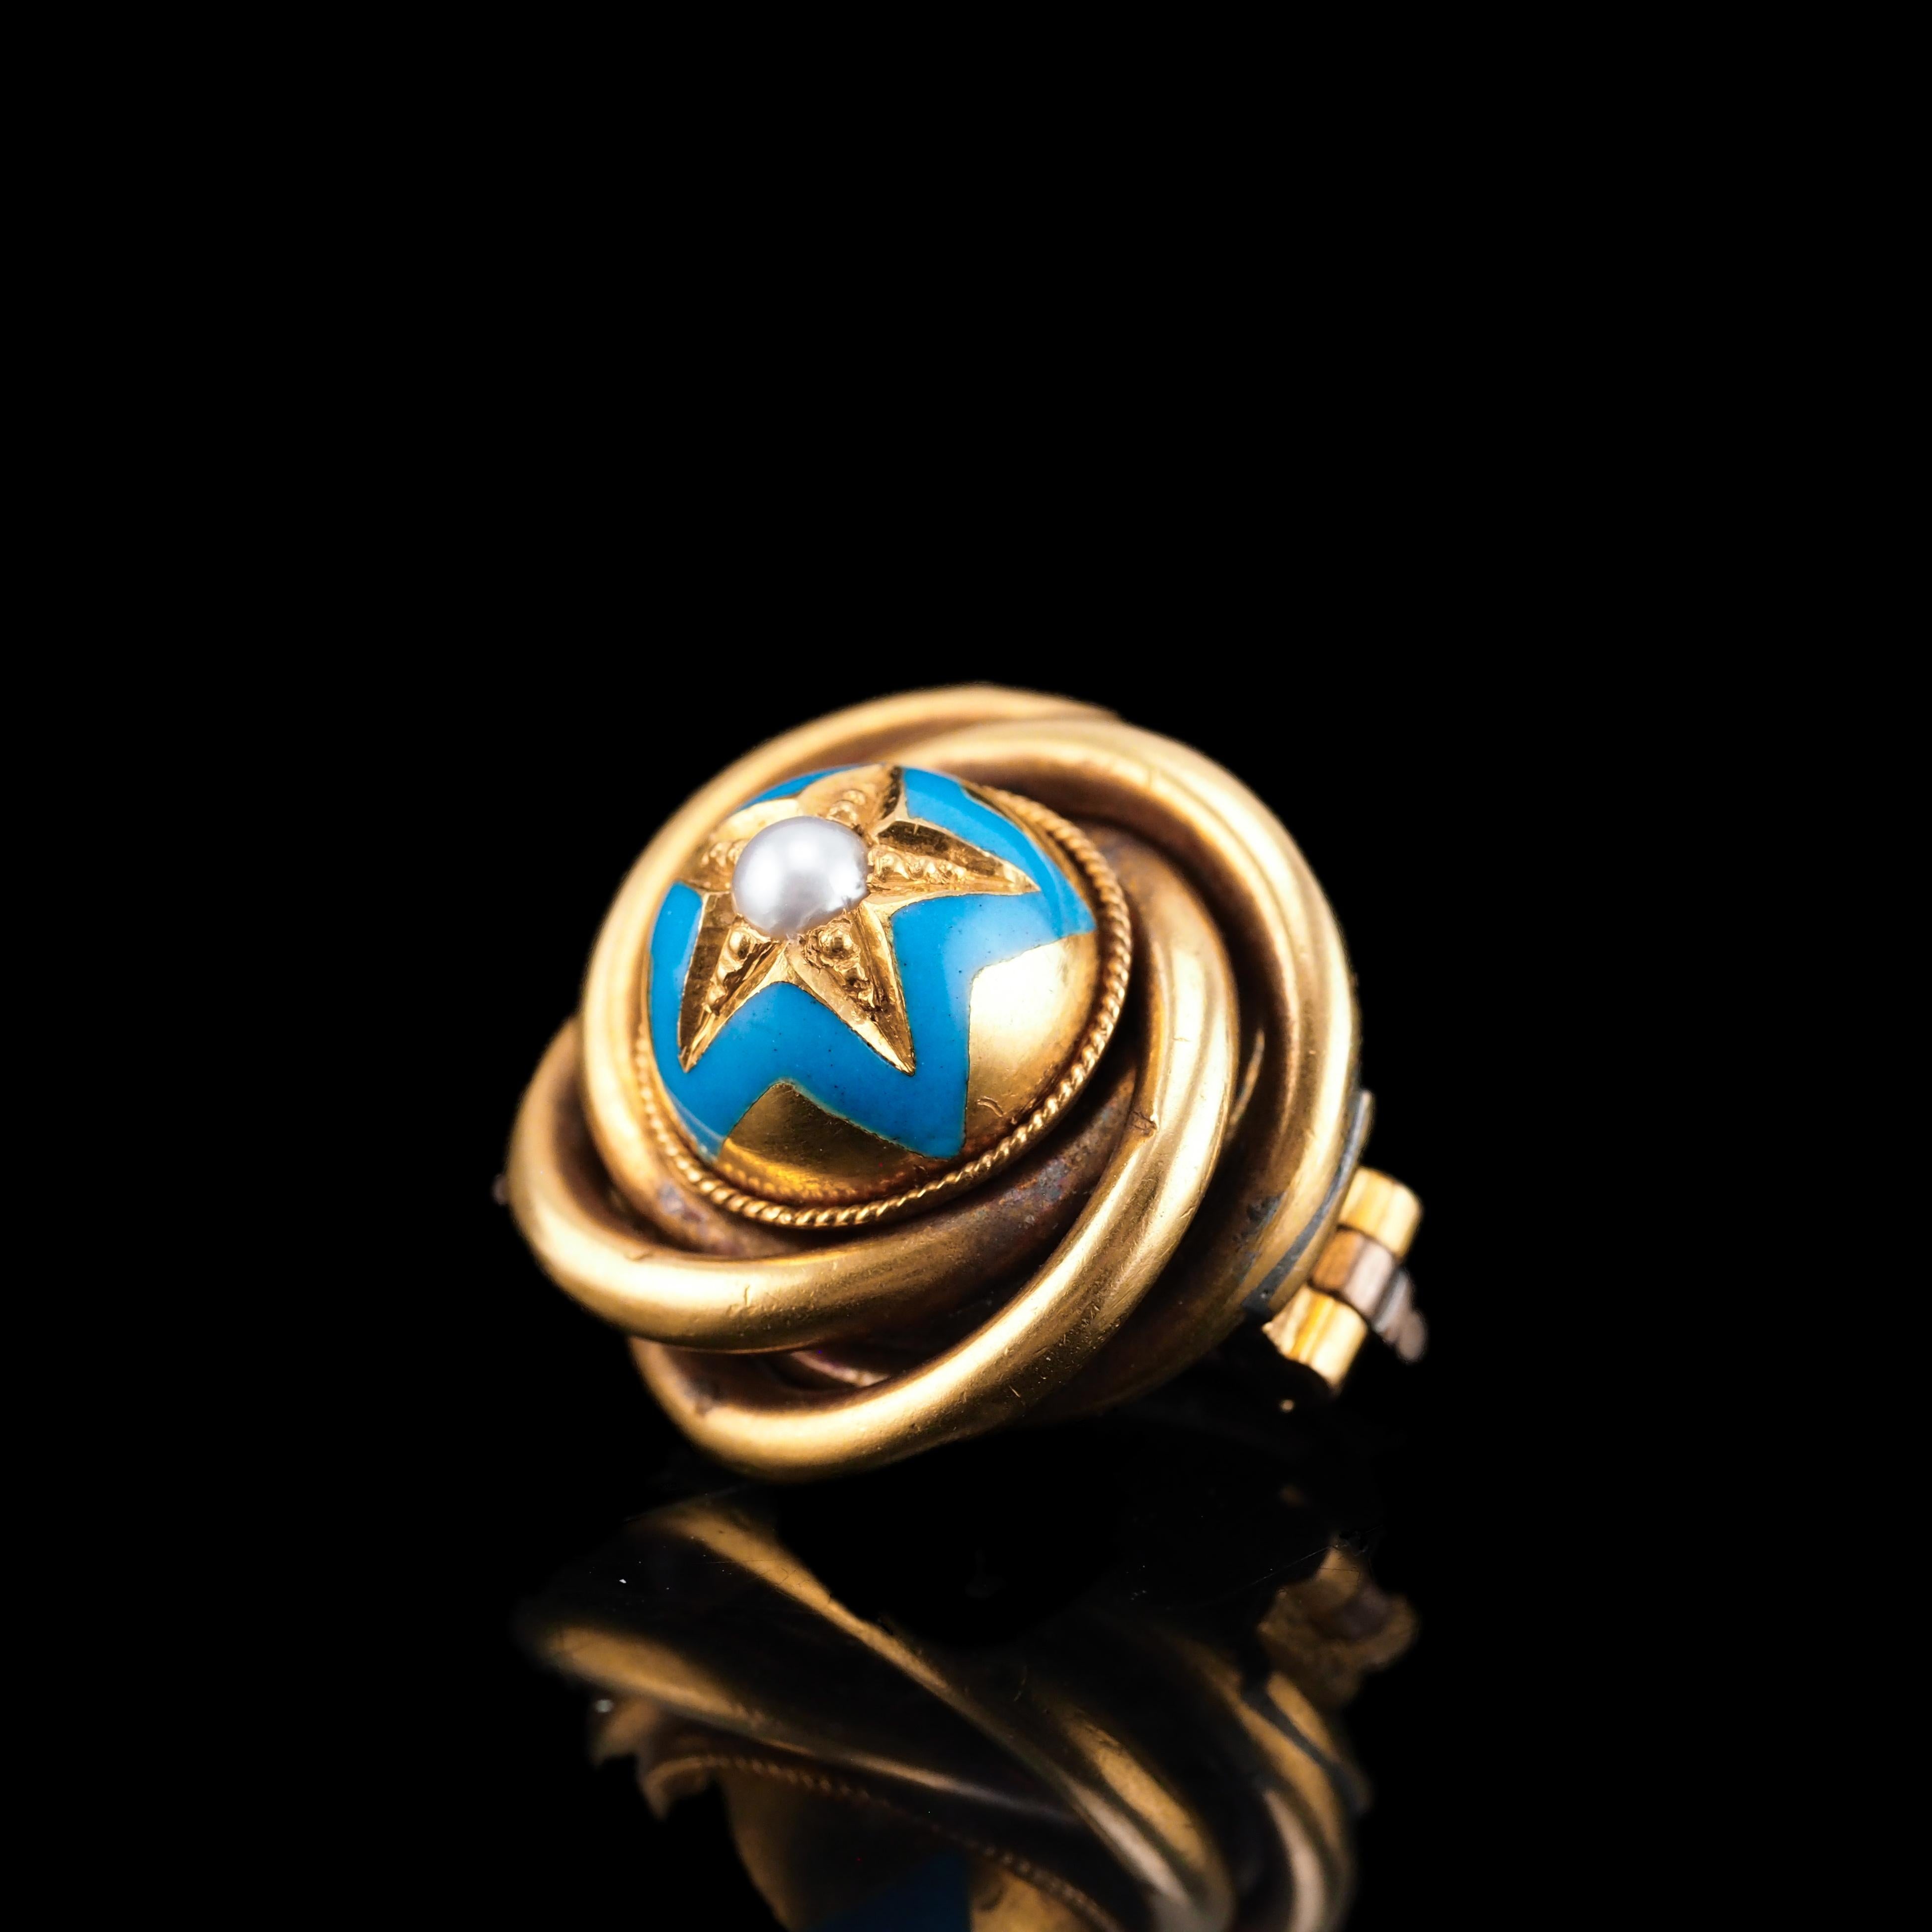 We are delighted to offer this charming antique Victorian 18ct gold enamel star brooch made c.1880. 
 
Modest in size yet striking in design, craftsmanship and style, this brooch is unapologetically Victorian with some of the era's most desirable